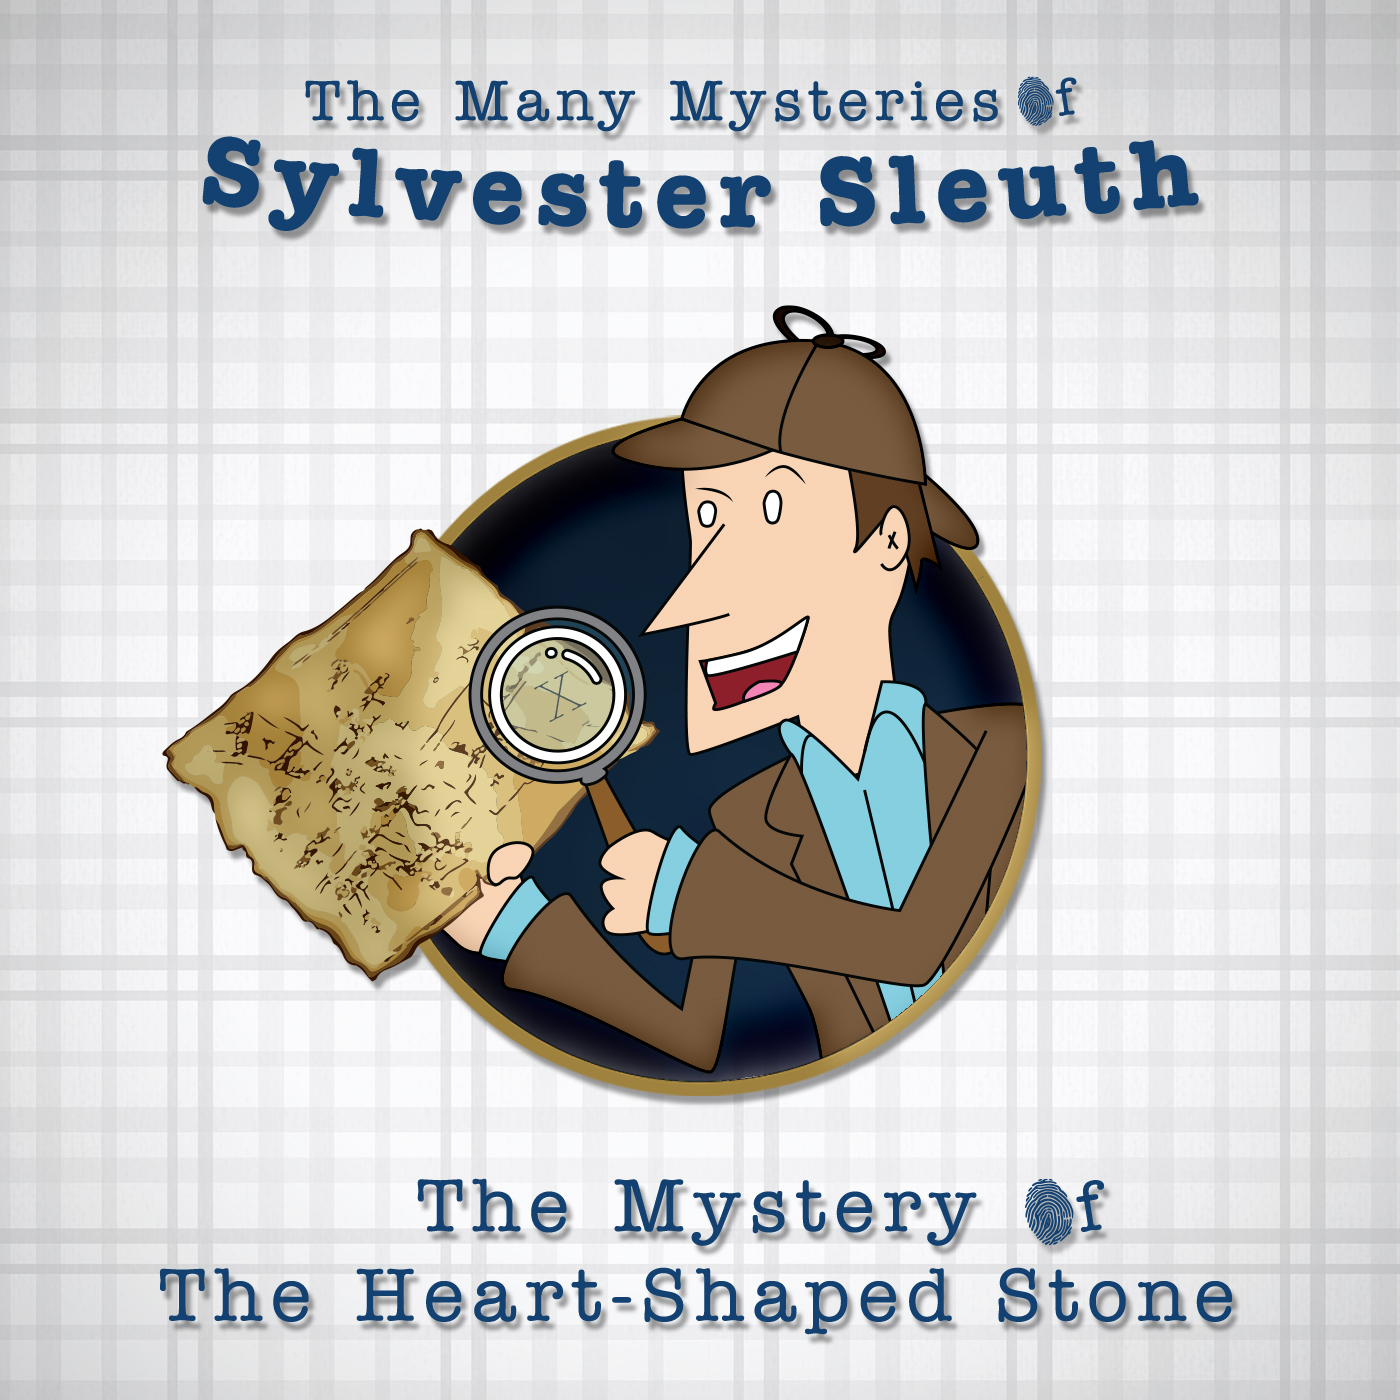 Sylvester Sleuth and the Secret of the Heart-Shaped Stone